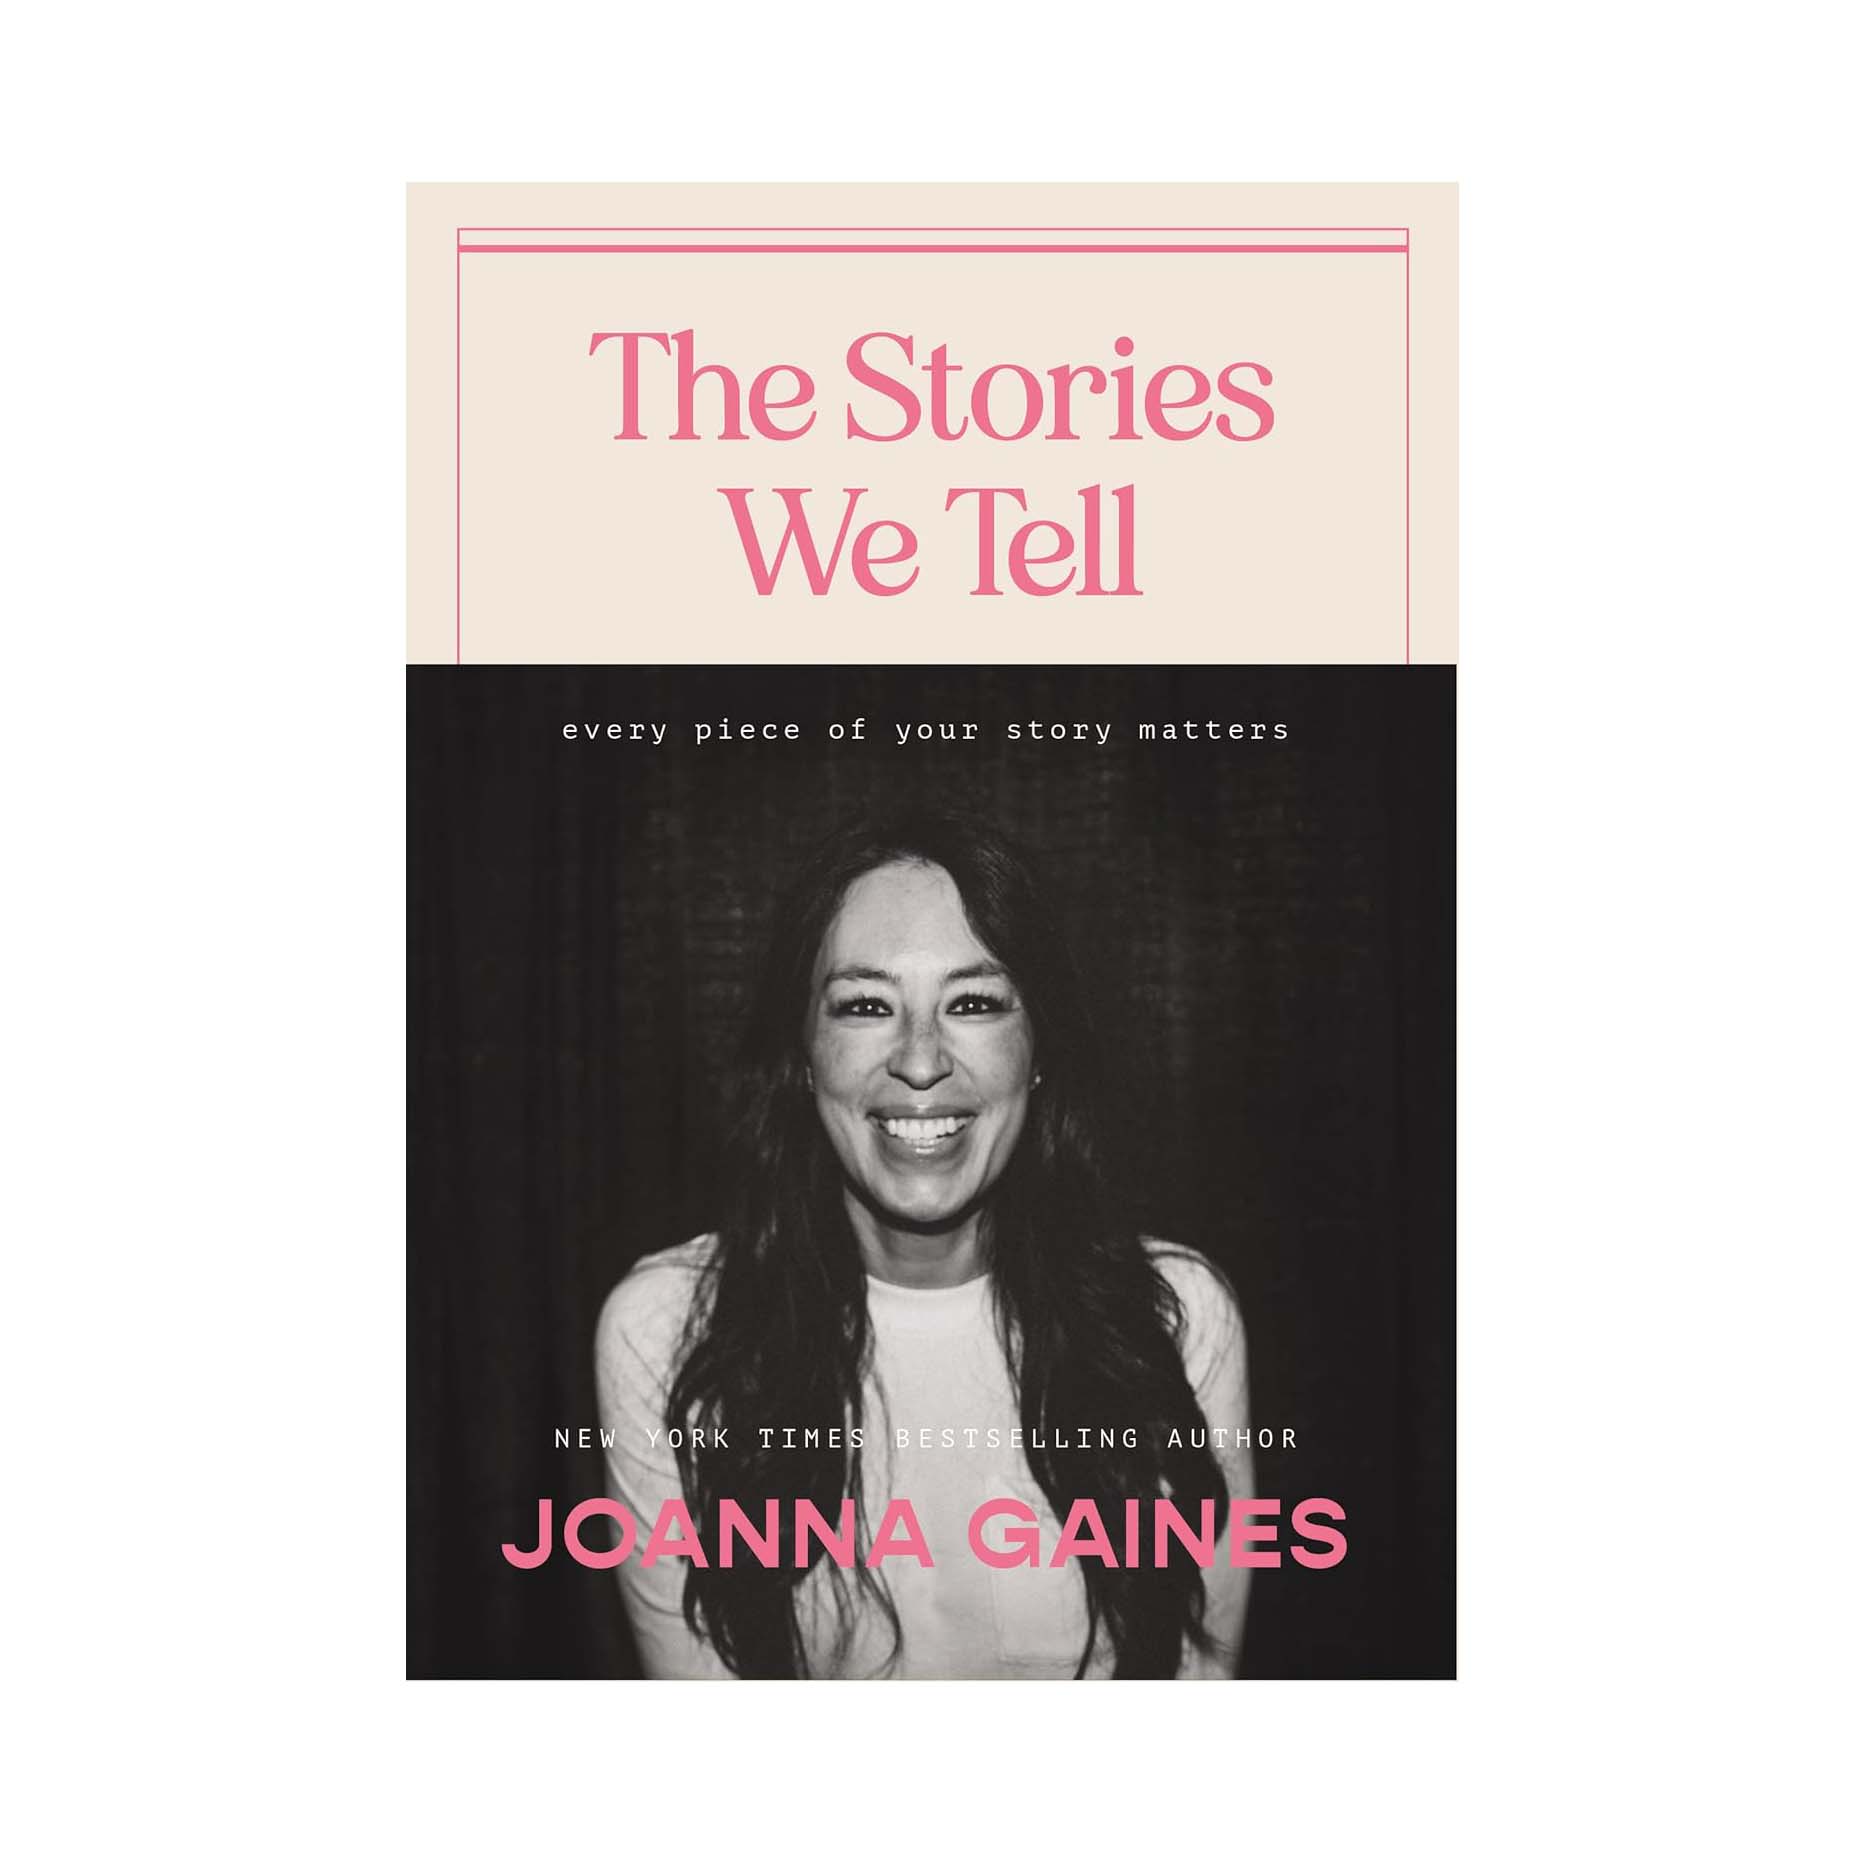 pink and black book titled The Stories We Tell: Every Piece of Your Story Matters by Joanna Gaines